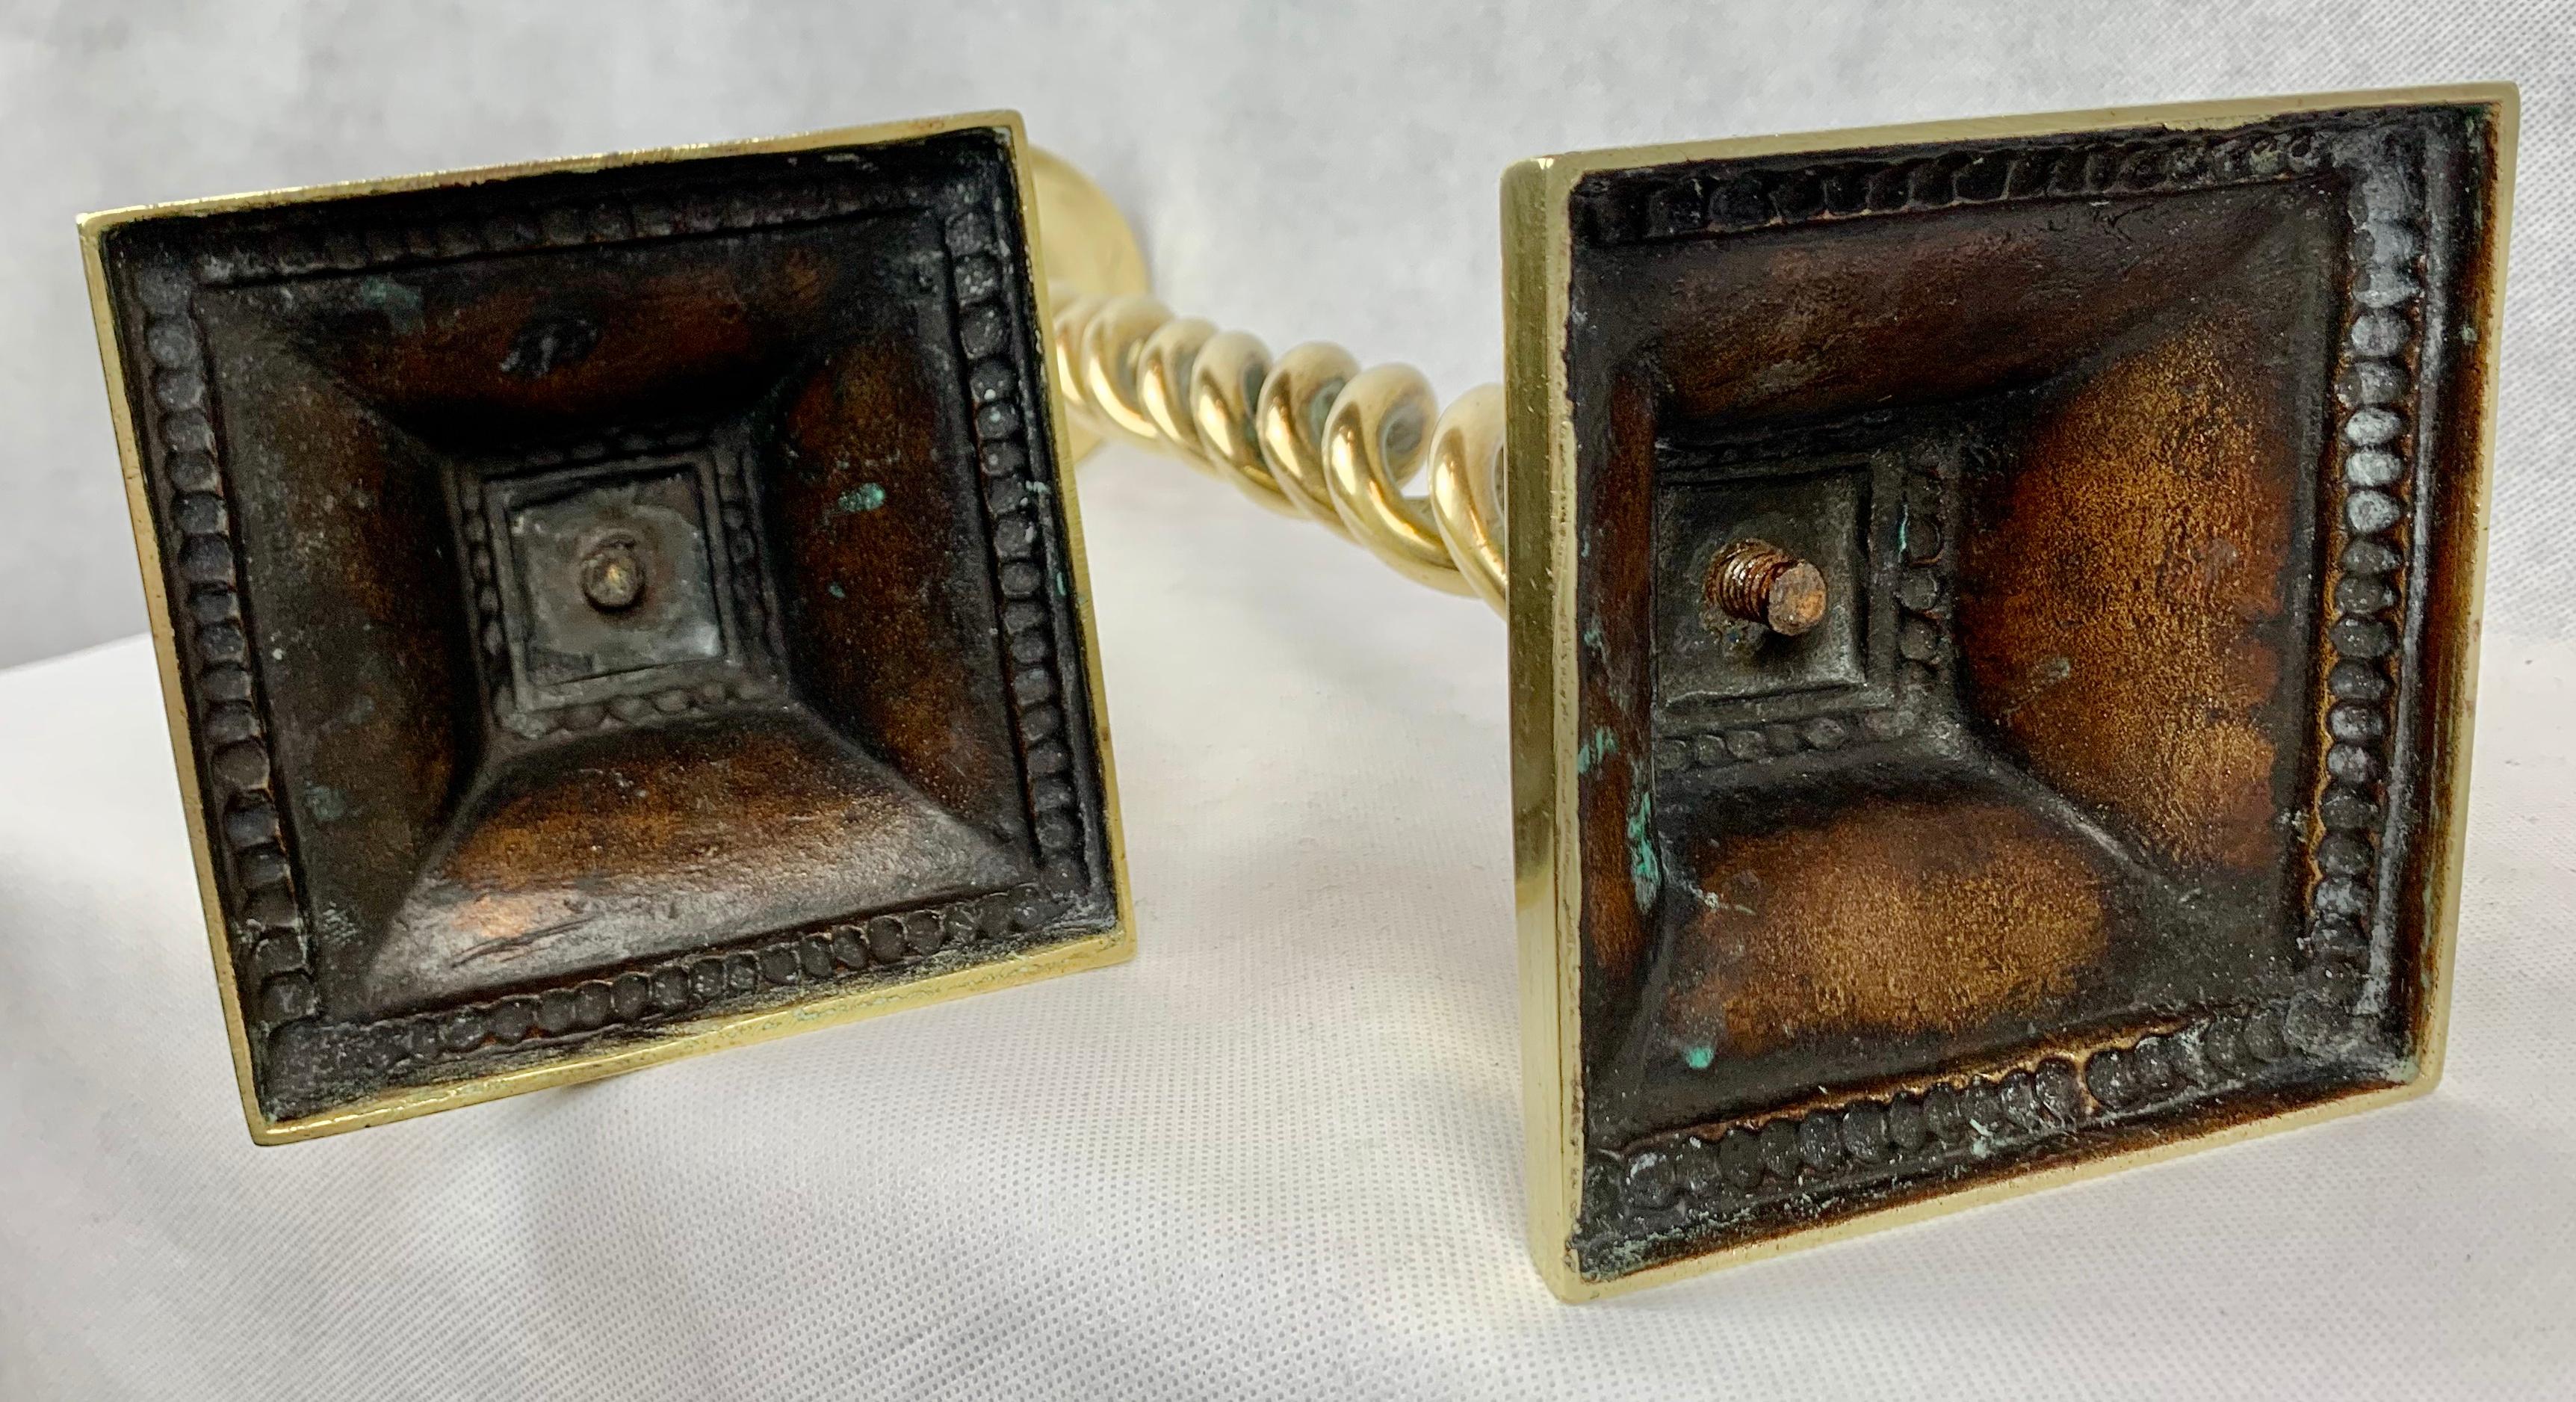 Hand-Crafted Solid Brass 21” Barley Twist Candlesticks with Square Bases, England, 19th c.